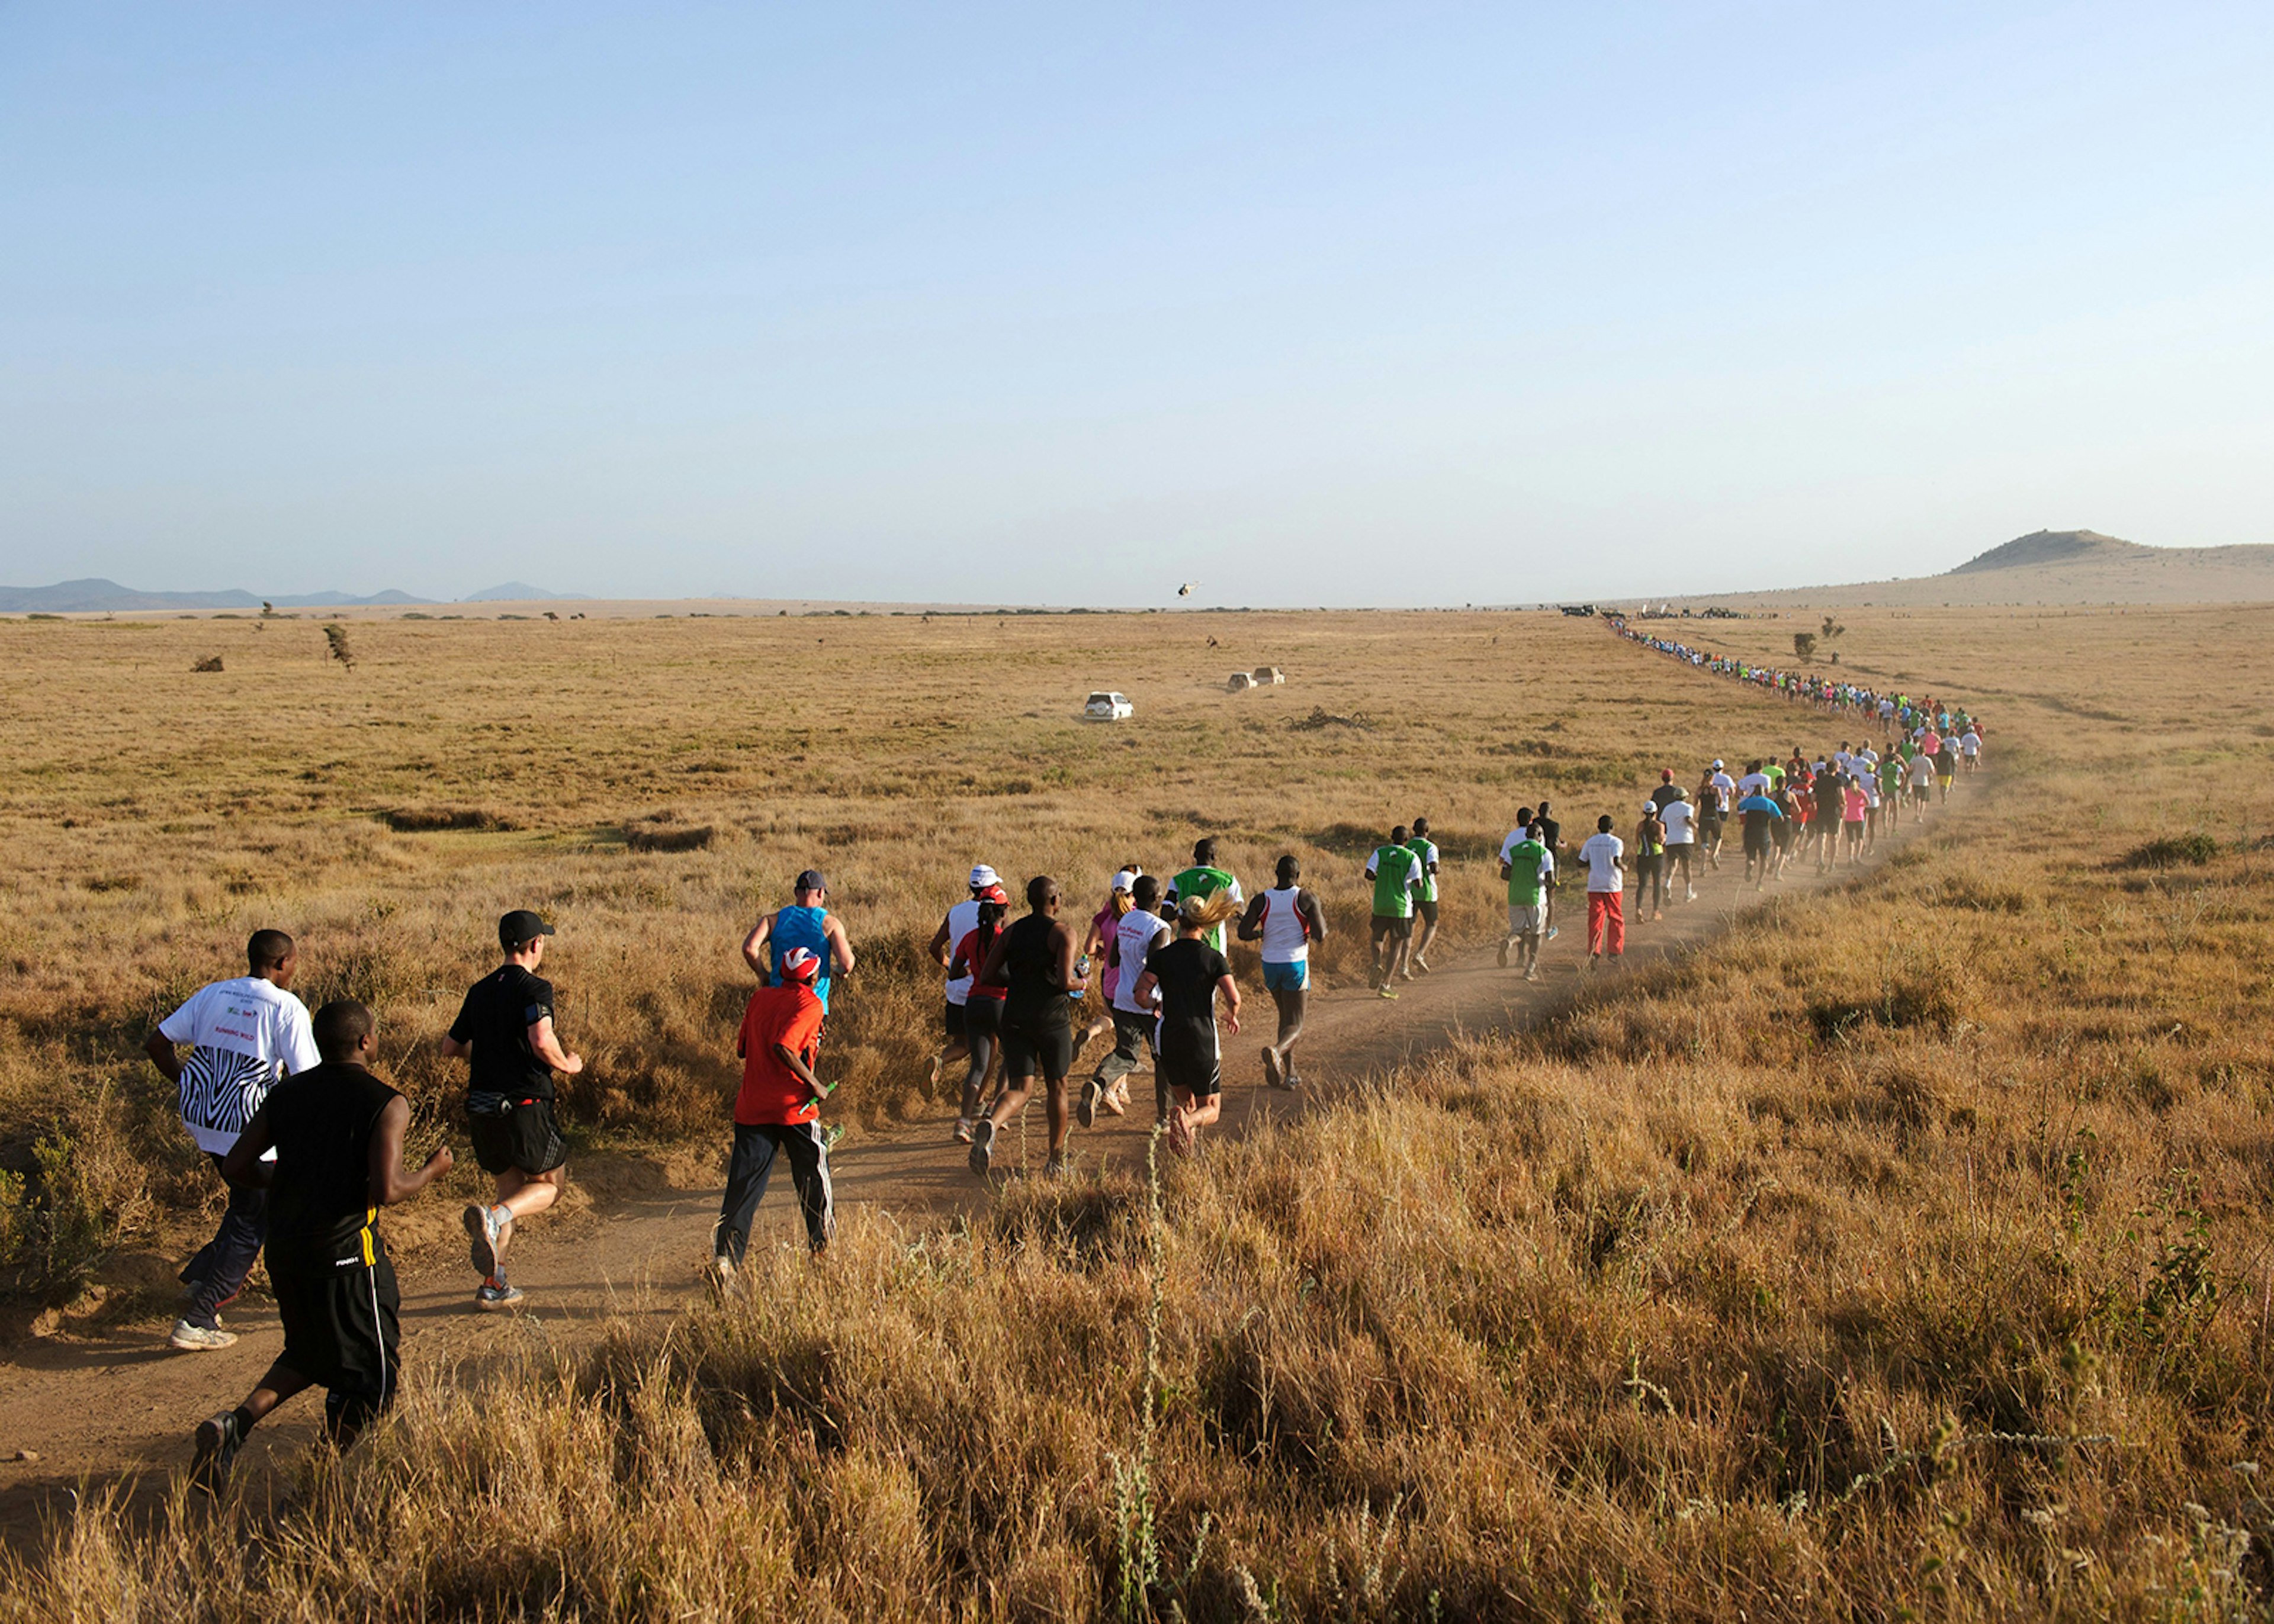 Runners competing in the Safaricom Marathon, Kenya © PHIL MOORE / Getty Images